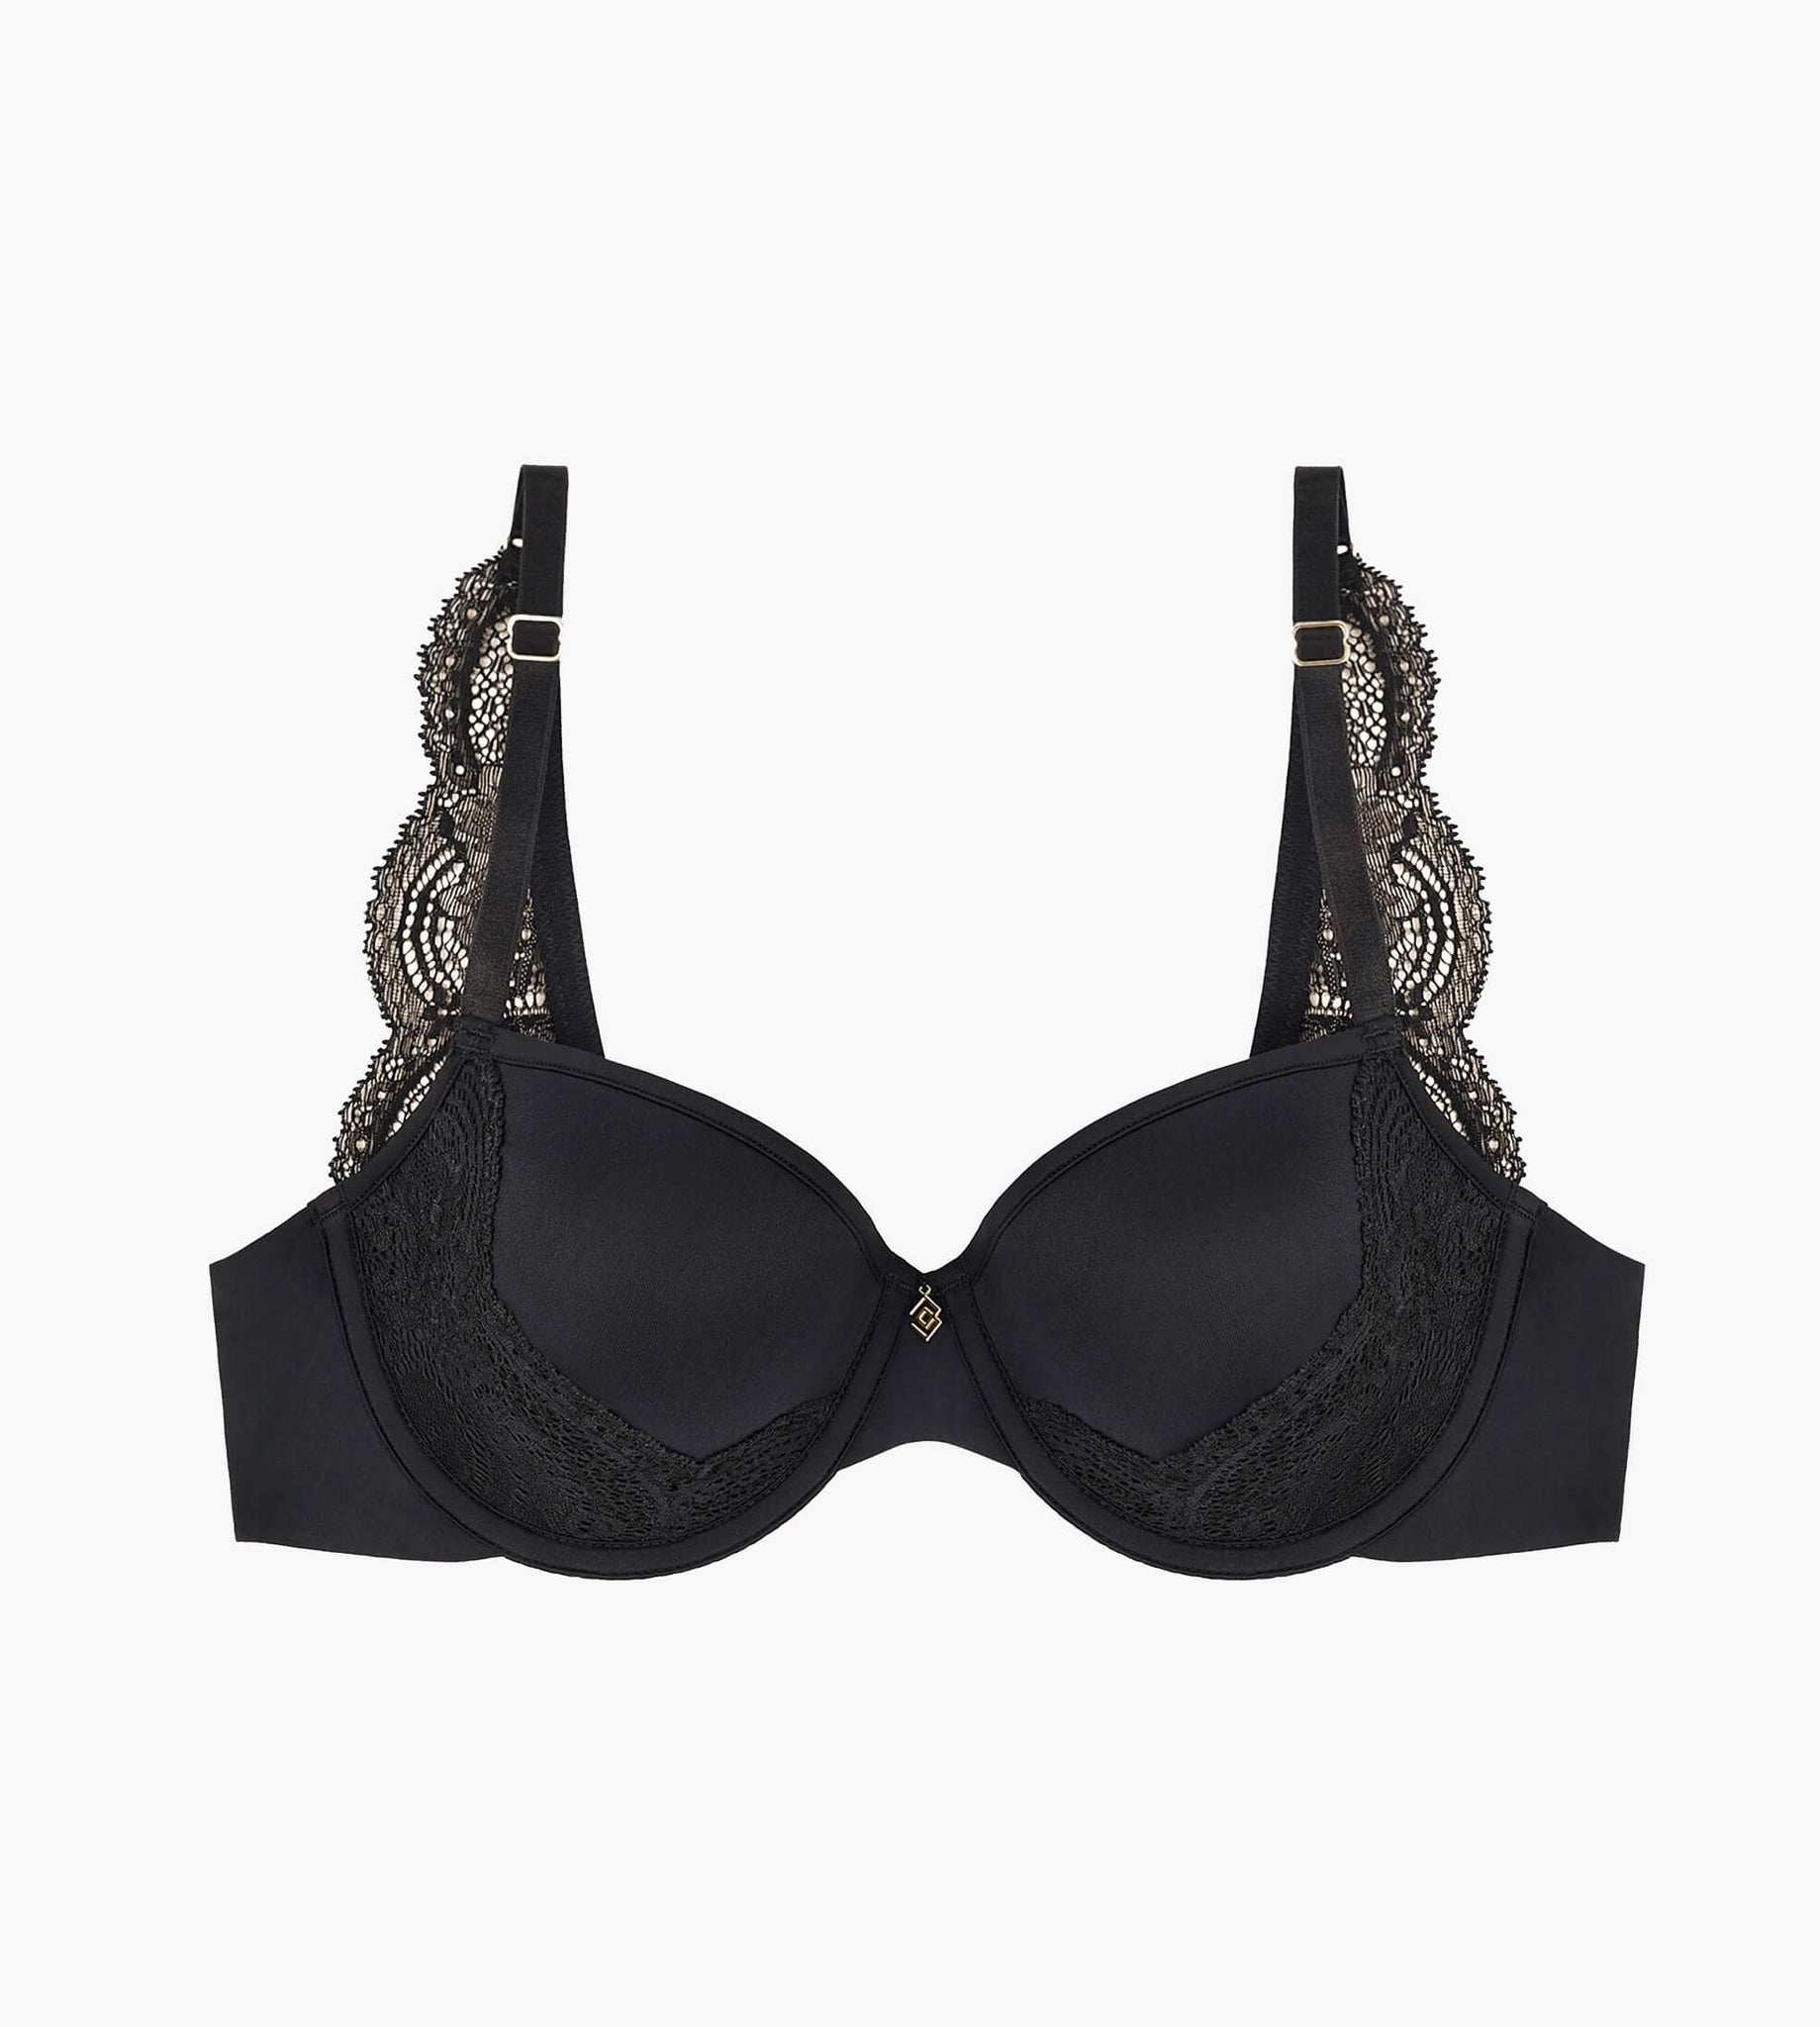 The Feather Lace Bra